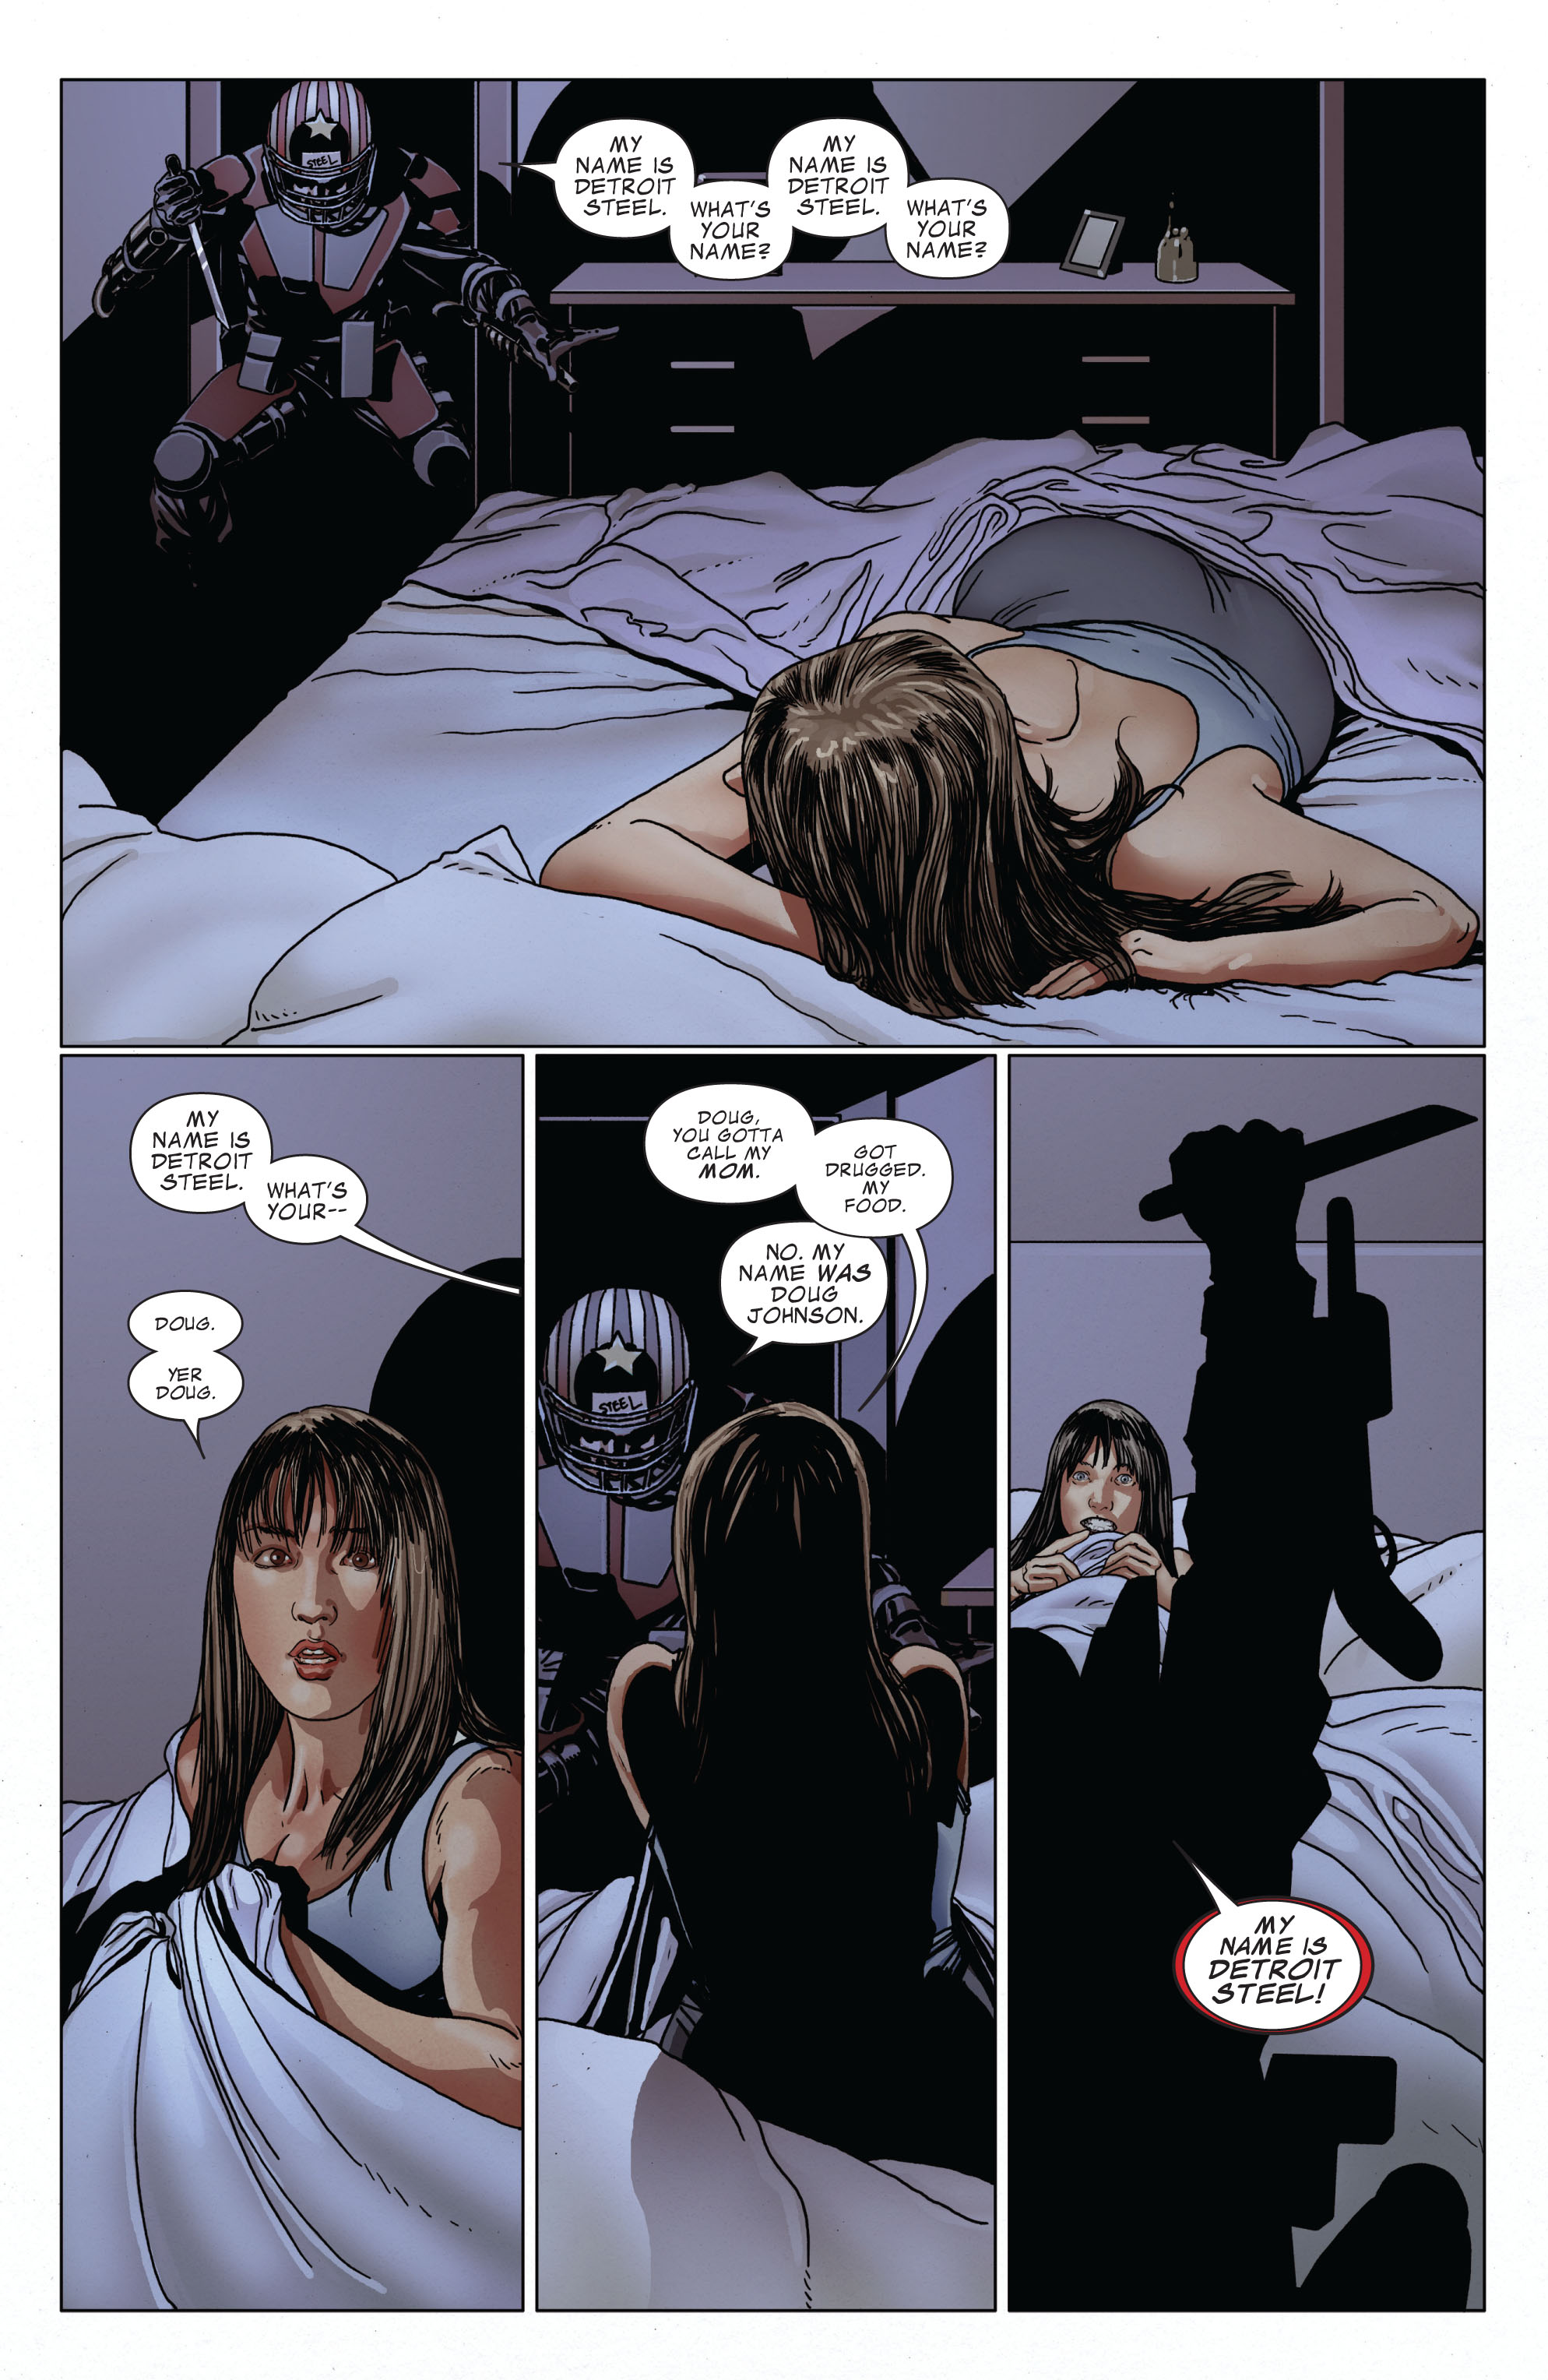 Invincible Iron Man (2008) 517 Page 12